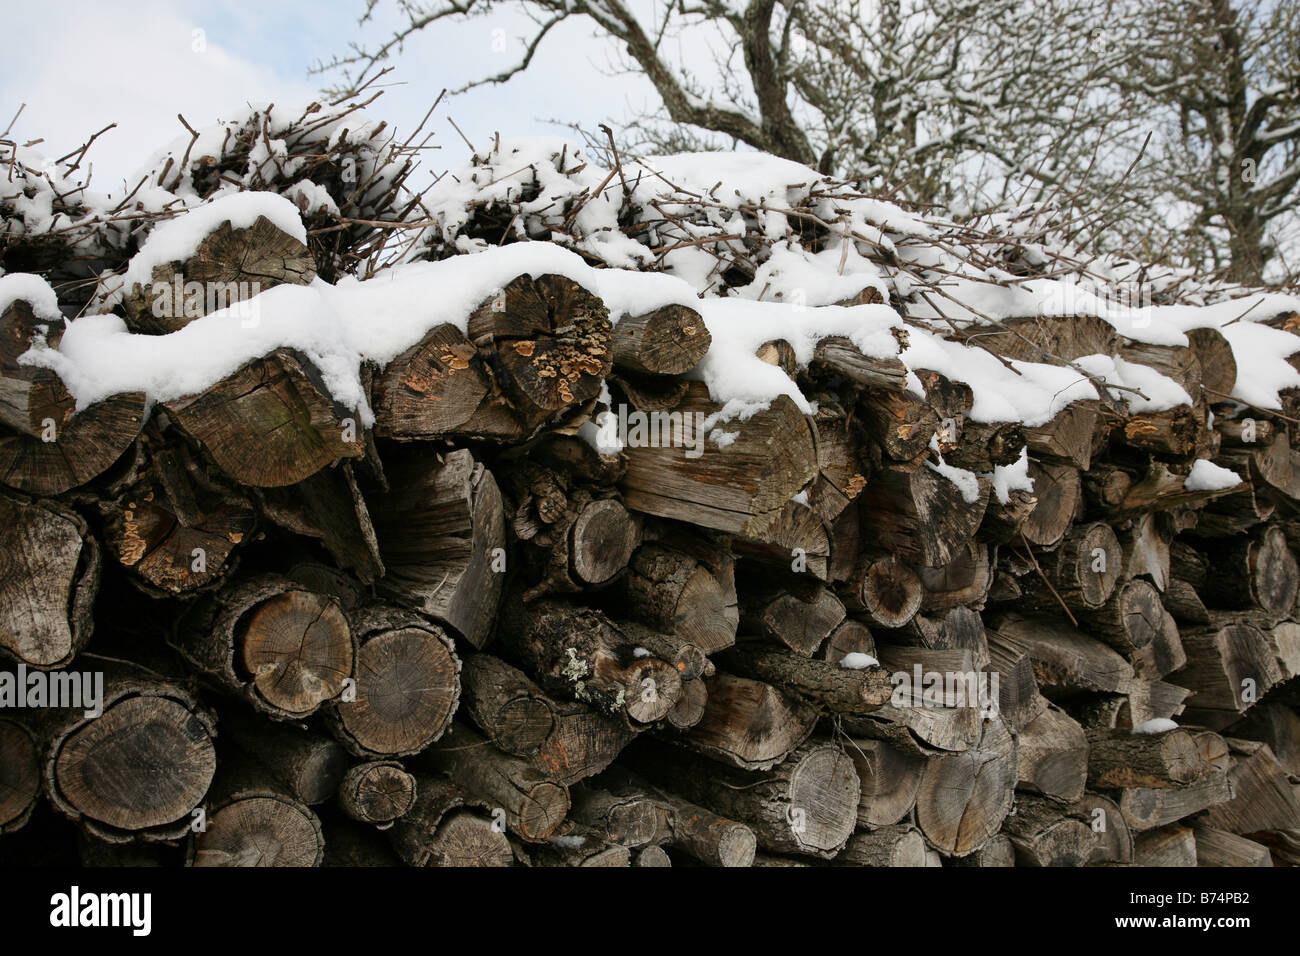 A large pile of logs and fire wood covered in snow Stock Photo